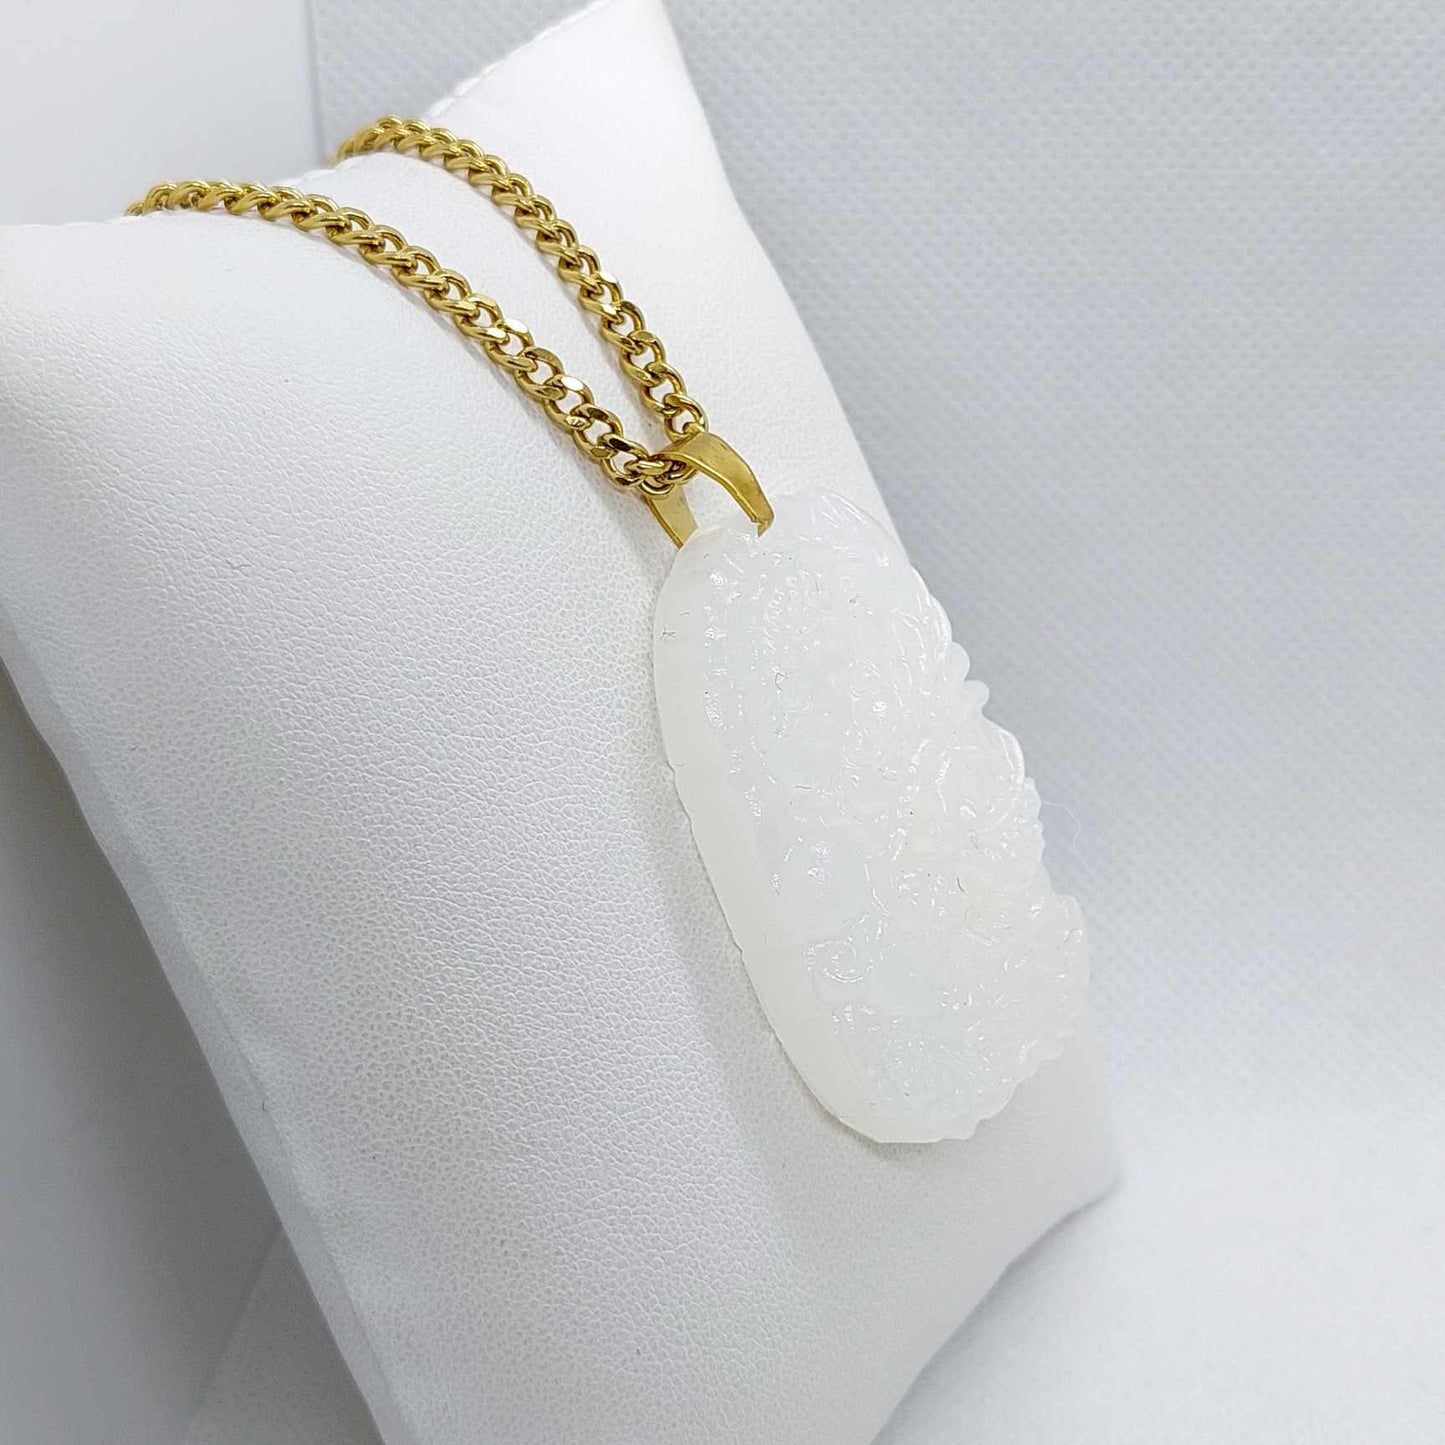 Natural White Hetian Jade Dragon Pendant with Gold Plated Stainless Steel Chain Necklace